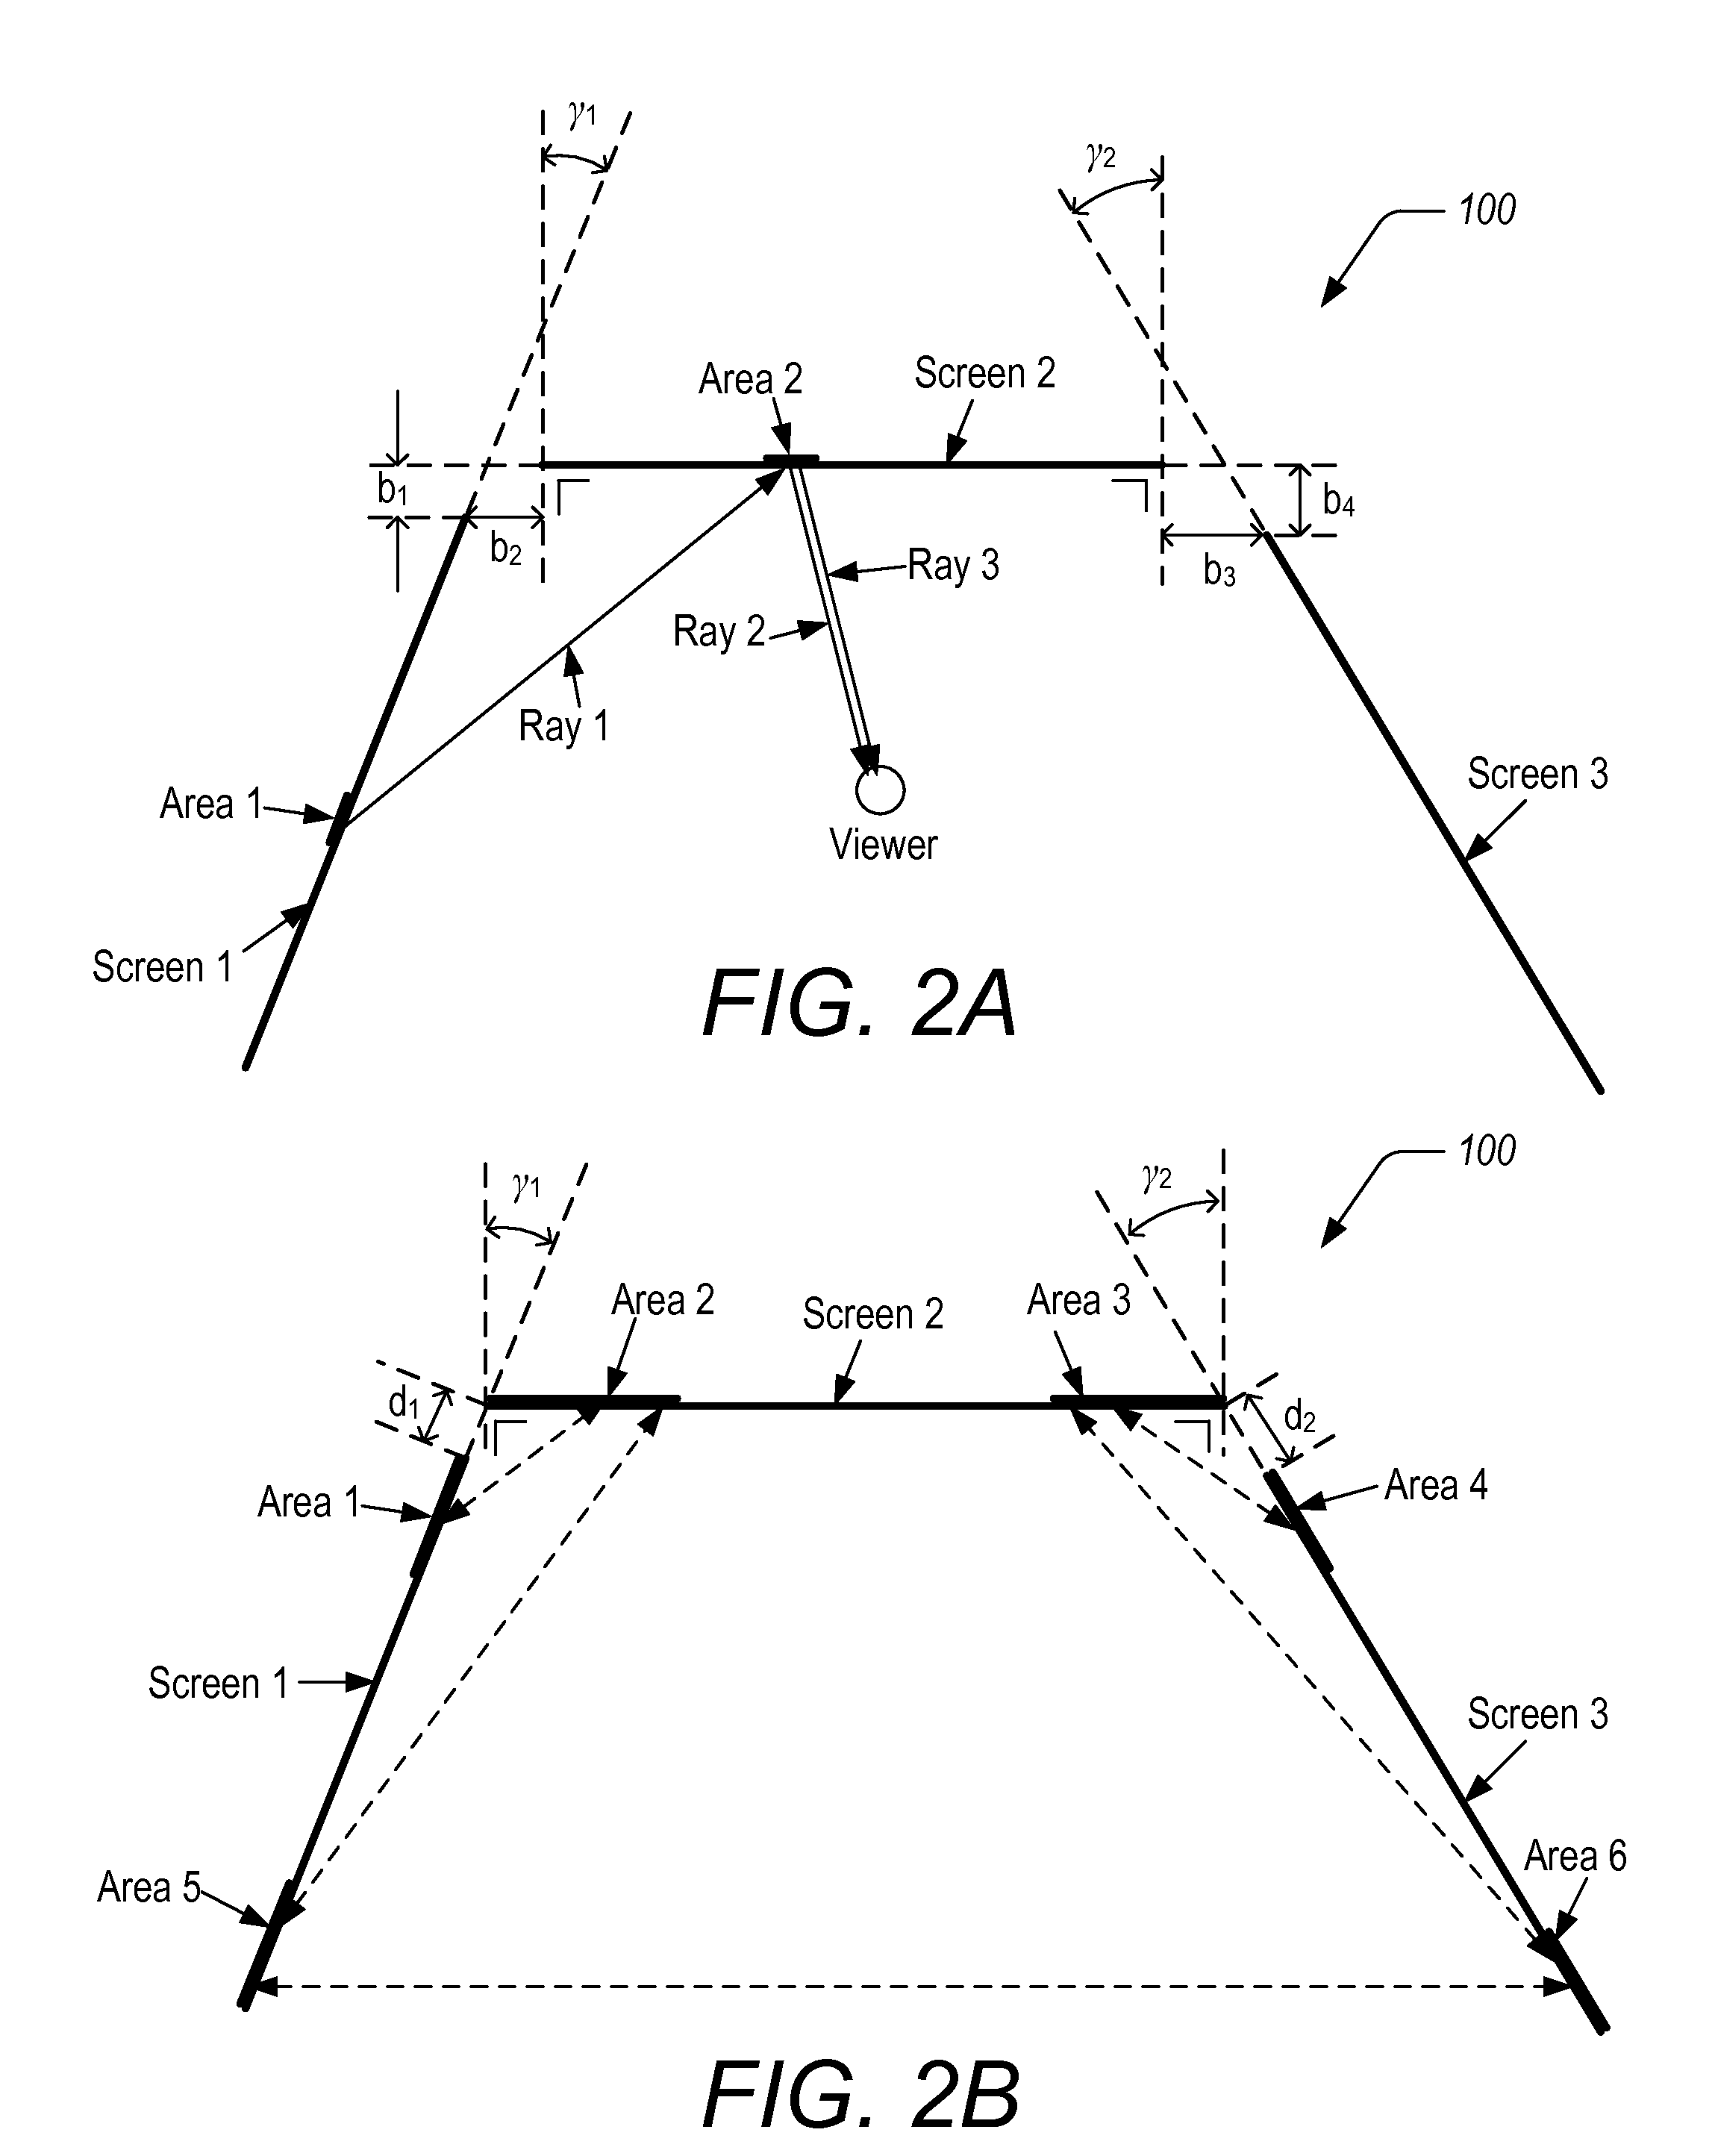 Display systems and methods employing polarizing reflective screens